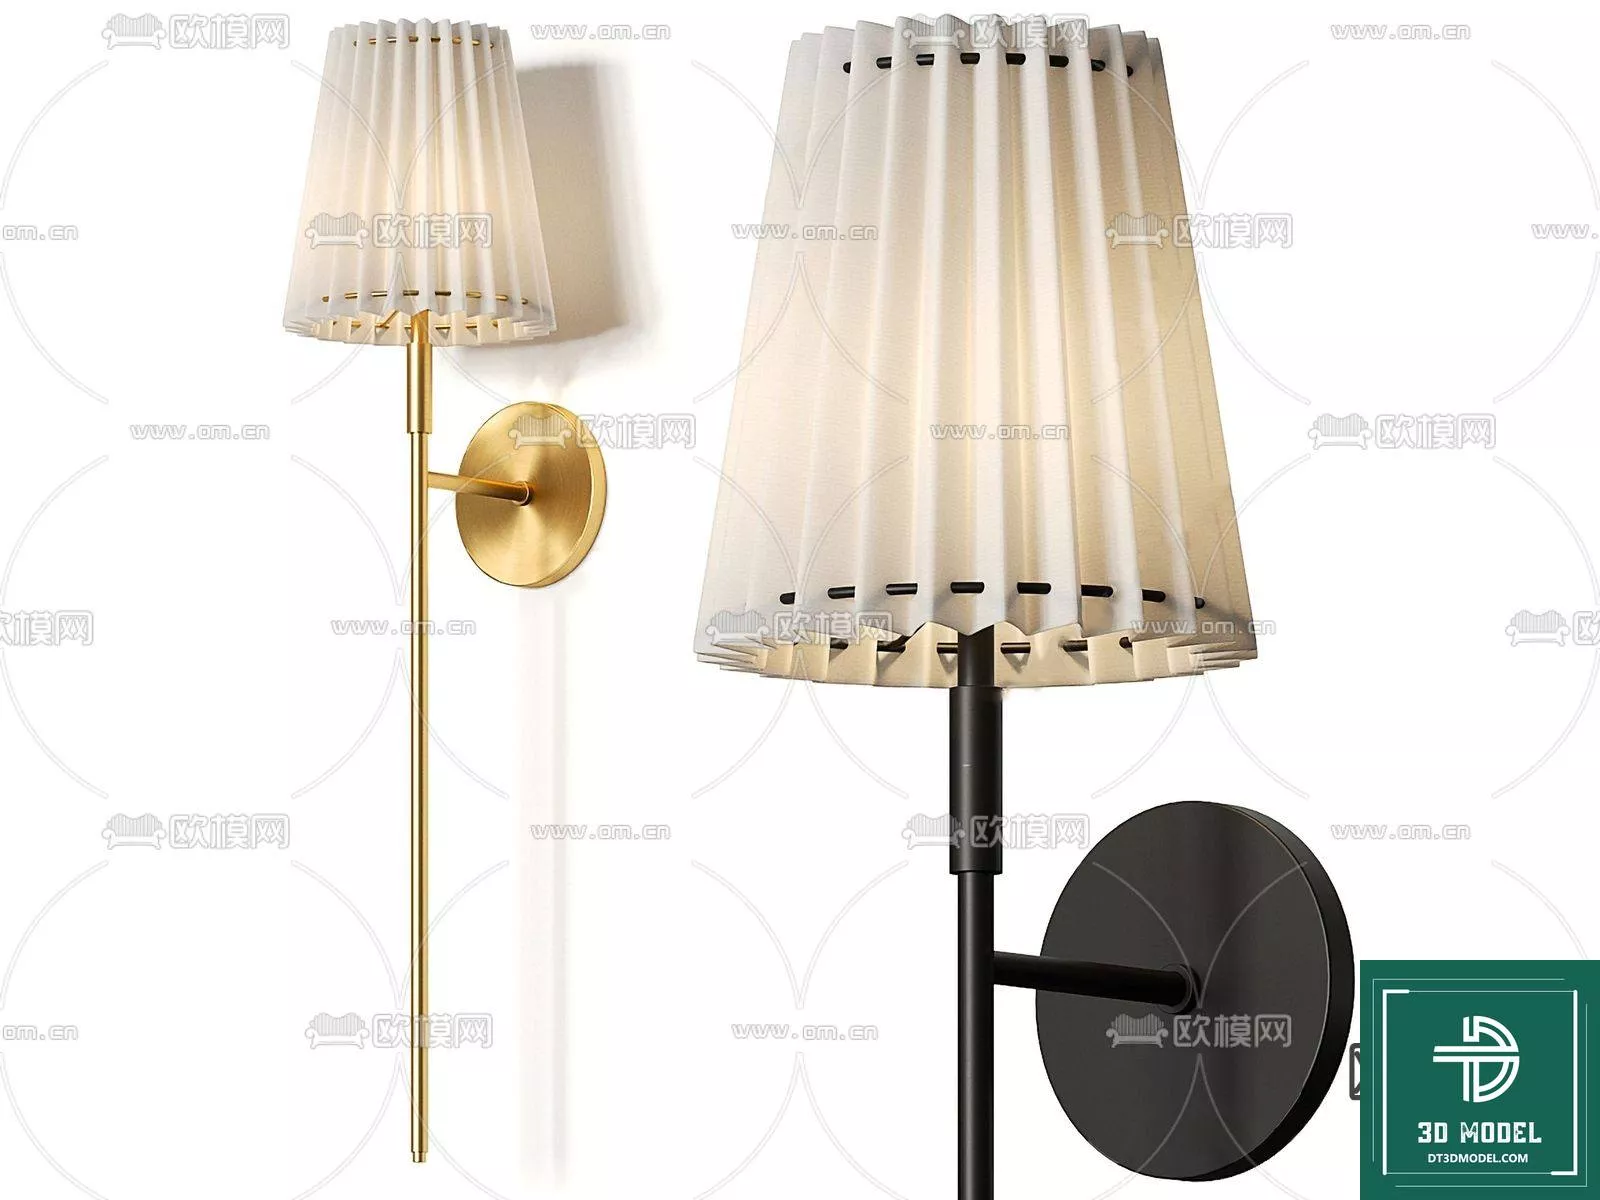 MODERN WALL LAMP - SKETCHUP 3D MODEL - VRAY OR ENSCAPE - ID16046